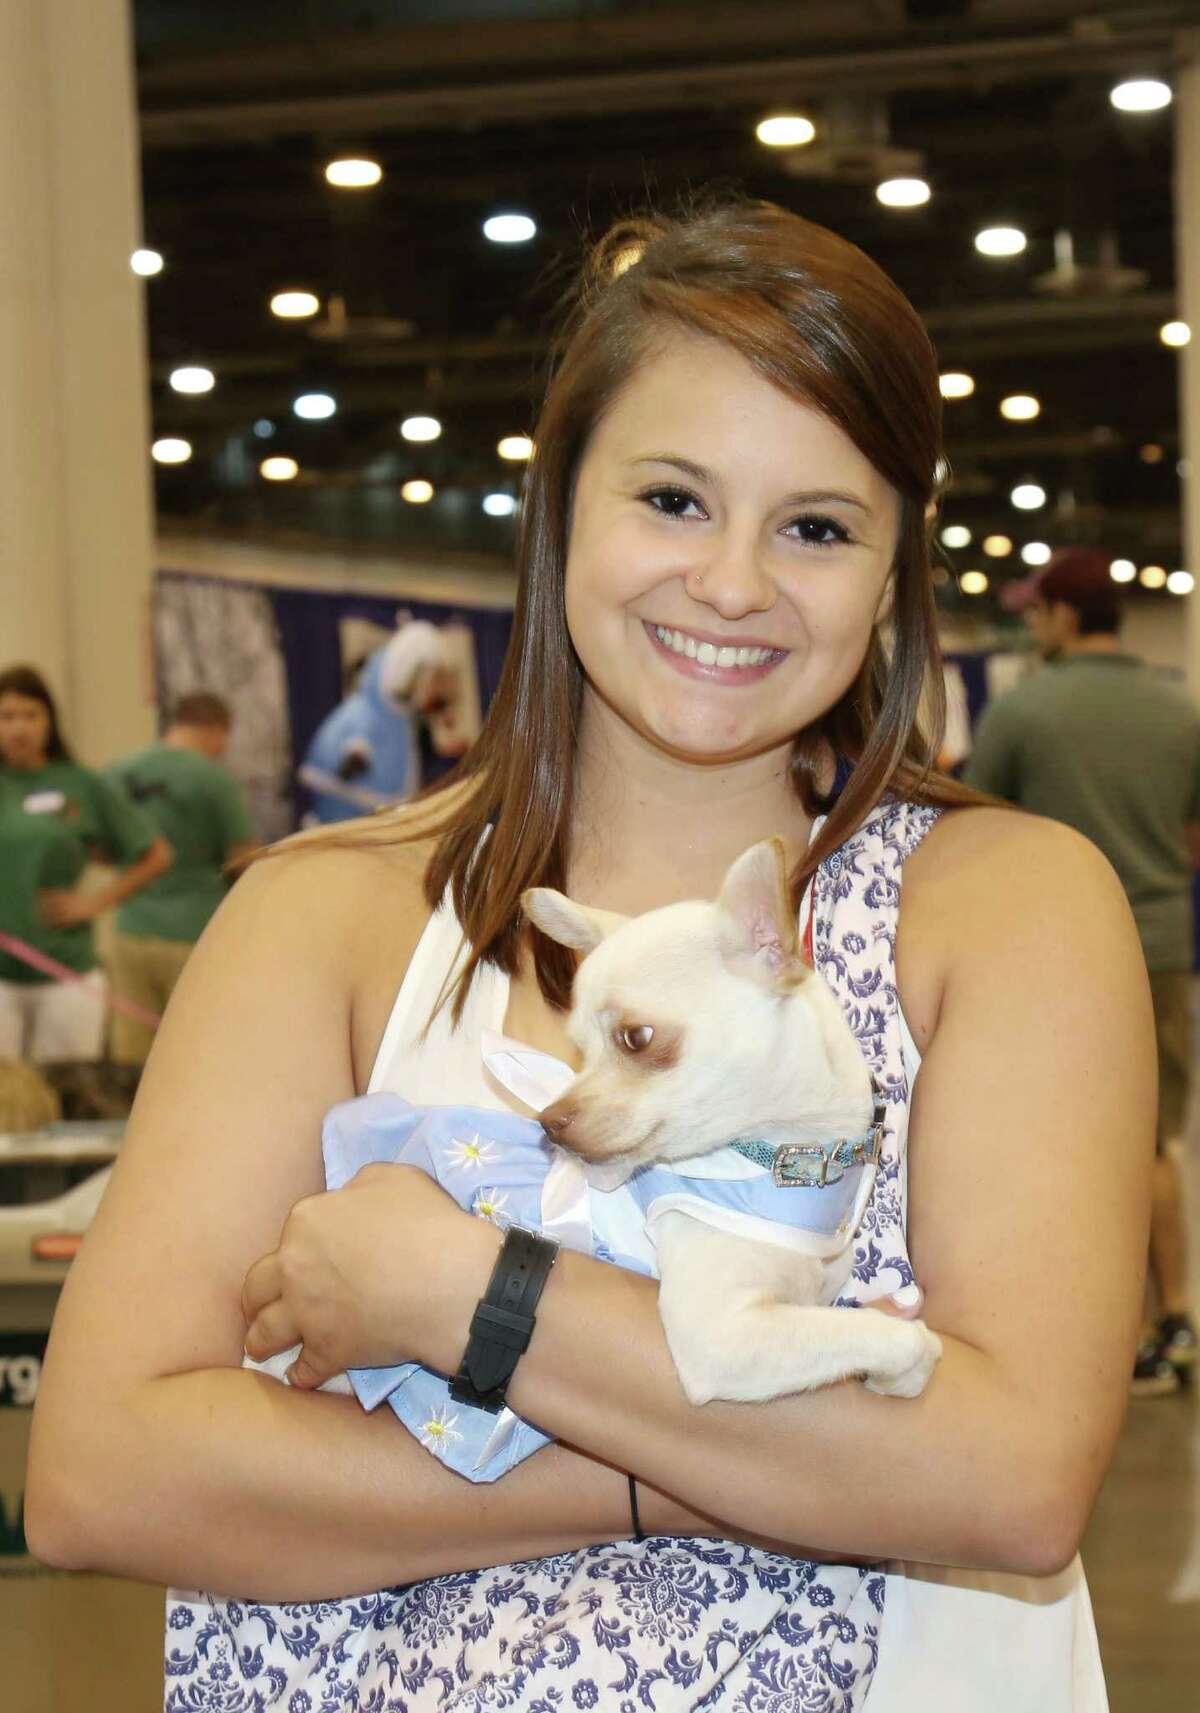 Canines show off talents at Houston's World Series of Dog Shows